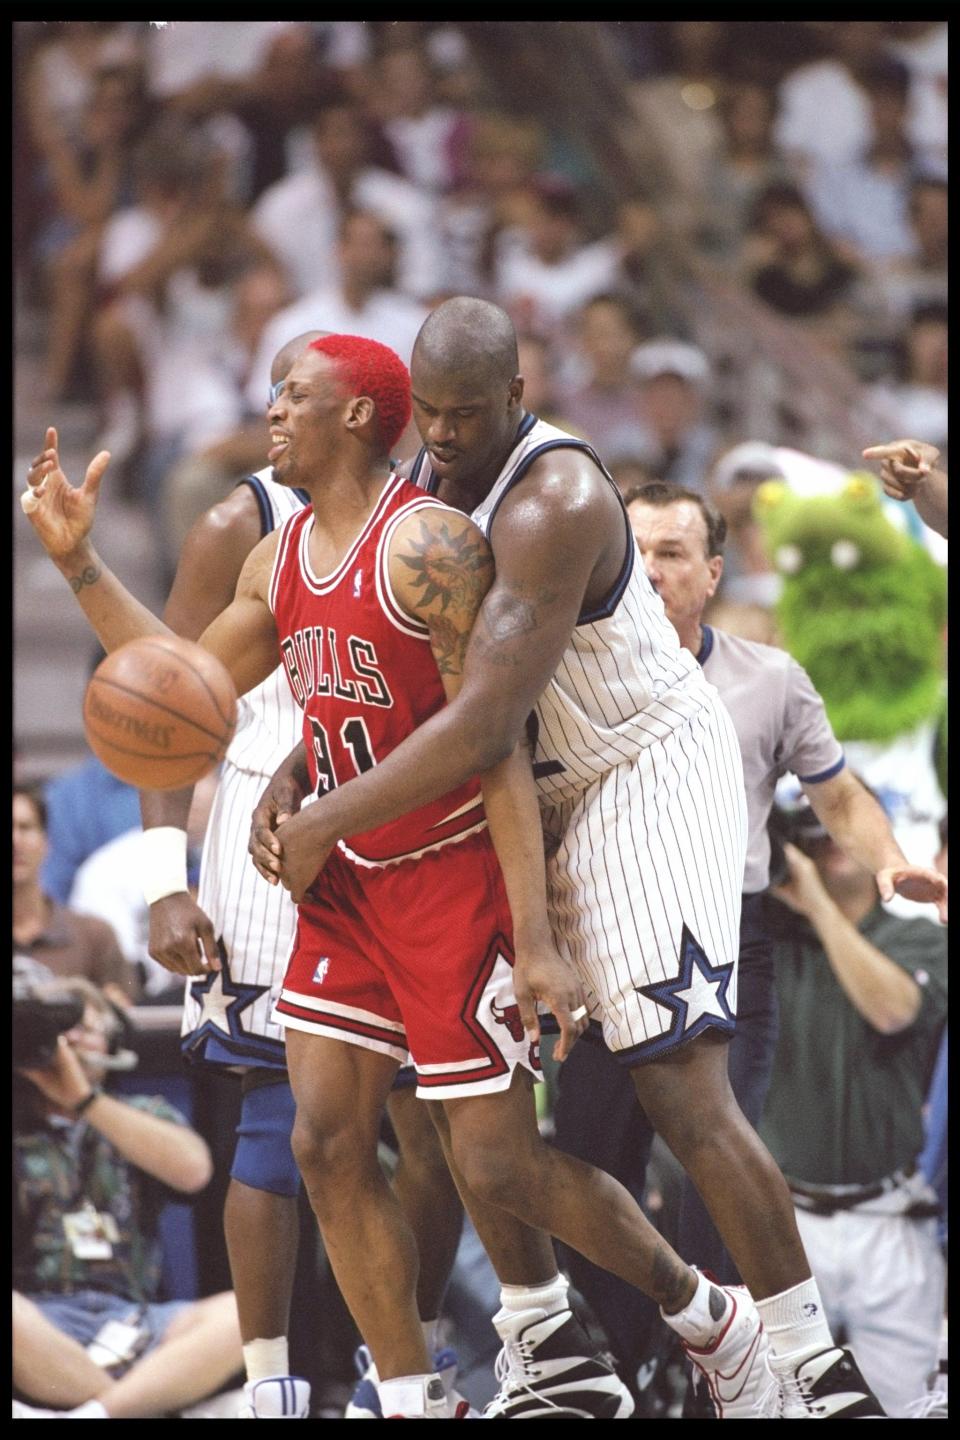 Dennis Rodman of the Chicago Bulls tries to break free of center Shaquille O'Neal of the Orlando Magic during a game at the Orlando Arena in Orlando, Florida on April 7, 1996. (Allsport)